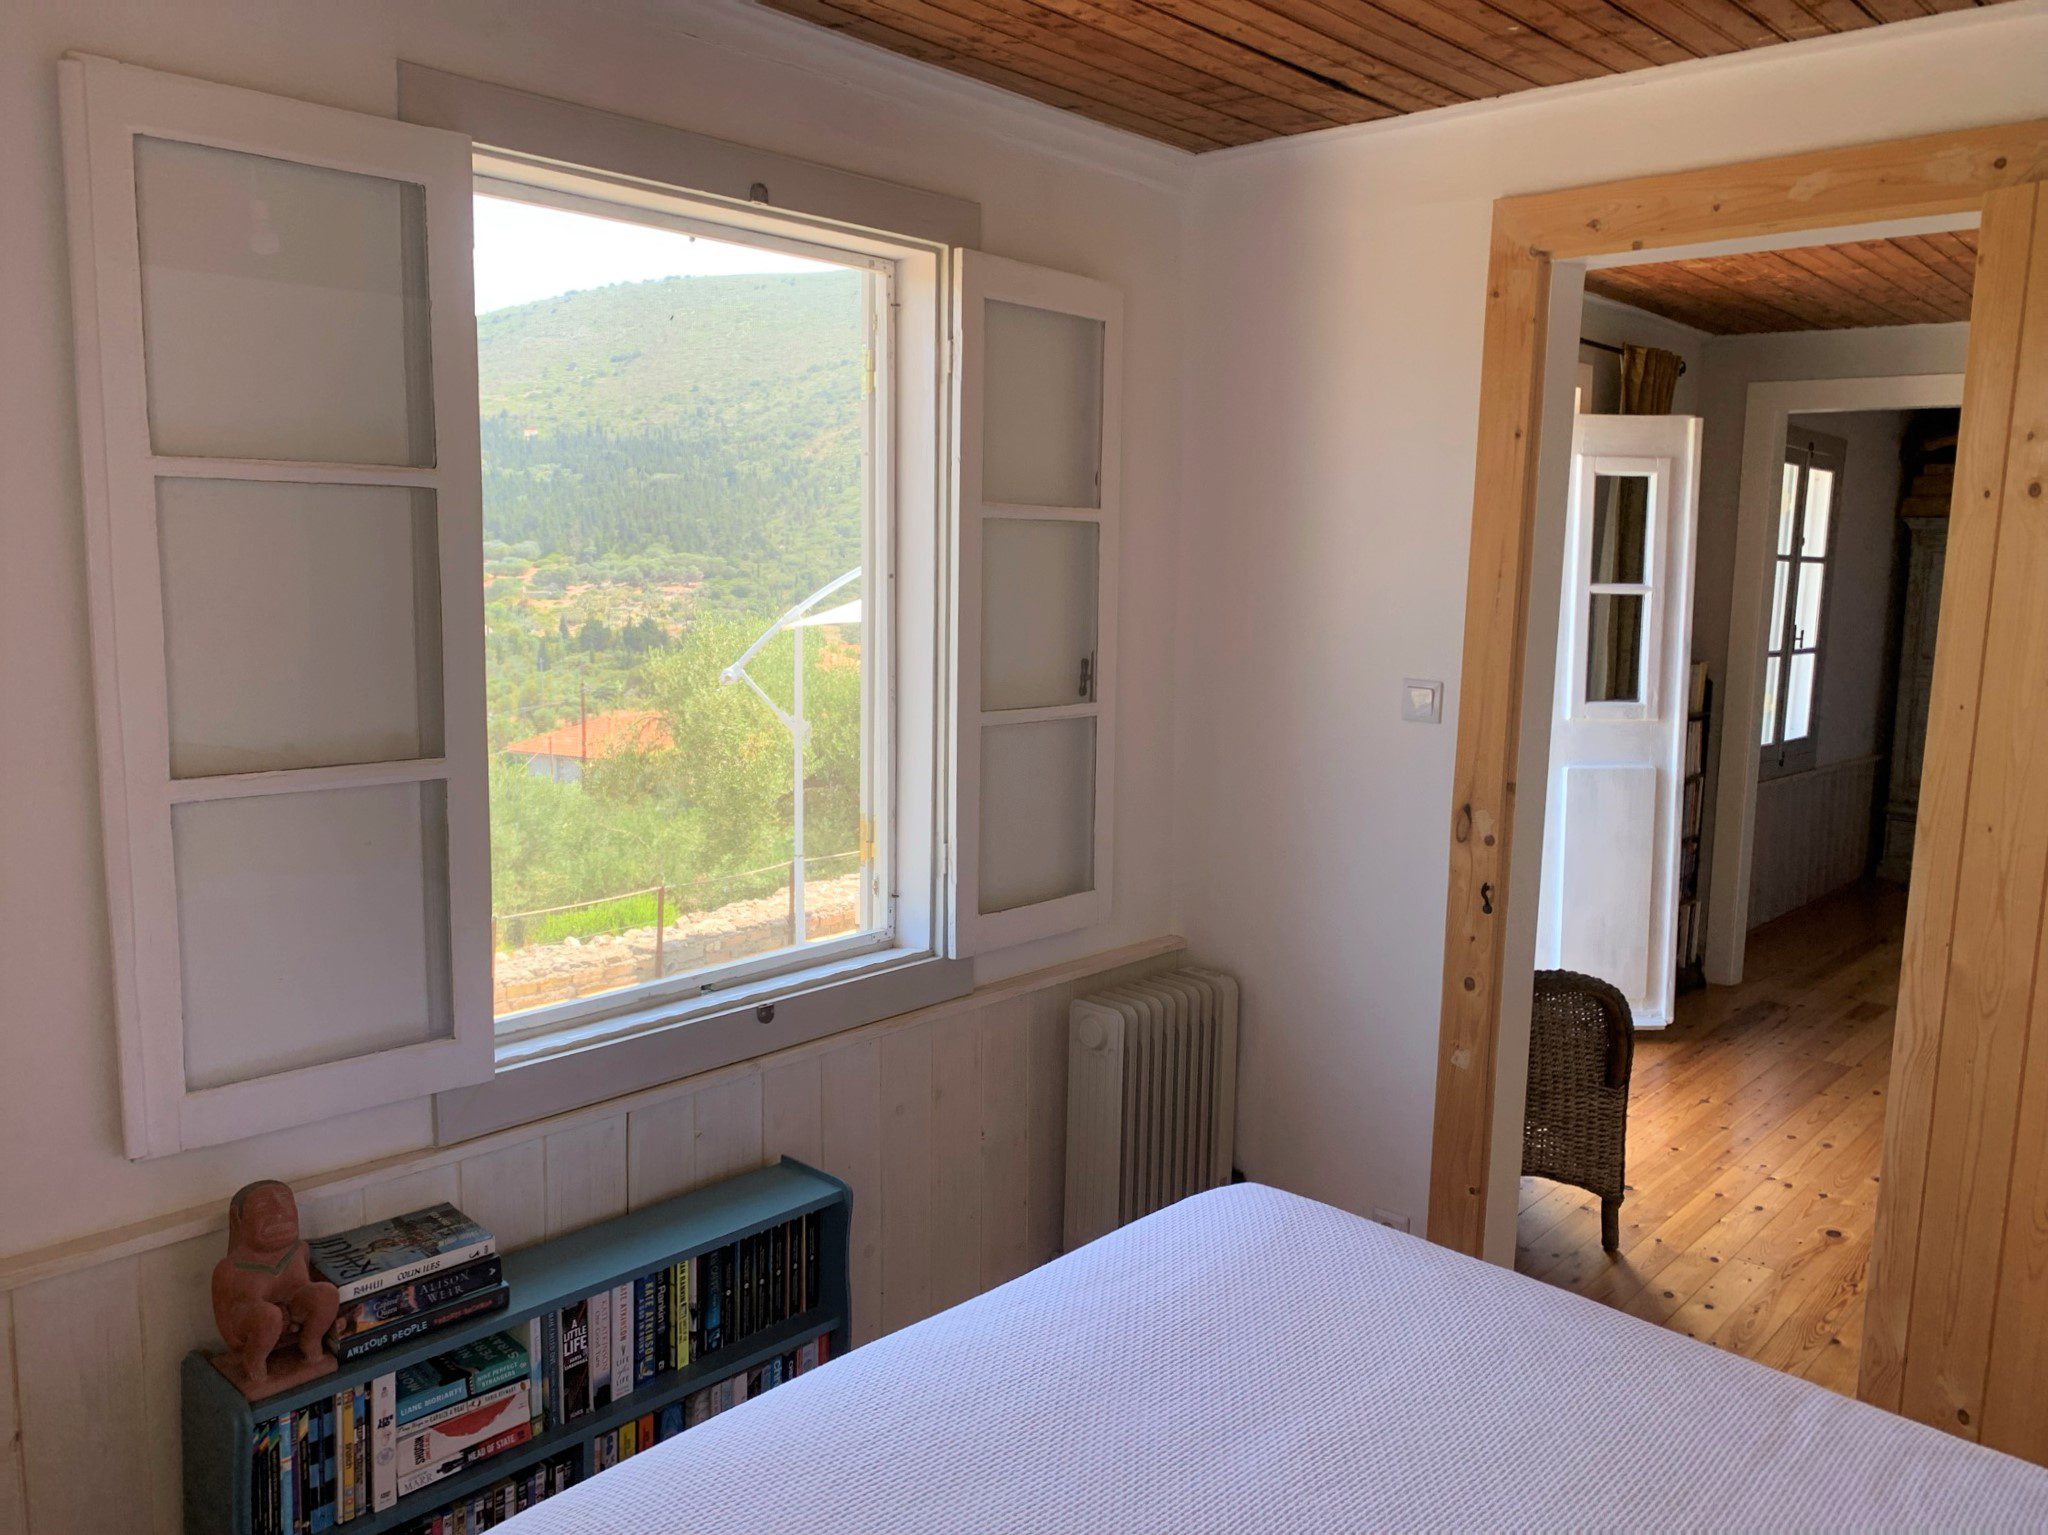 Bedroom of house for sale in Ithaca Greece,Ag Saranta